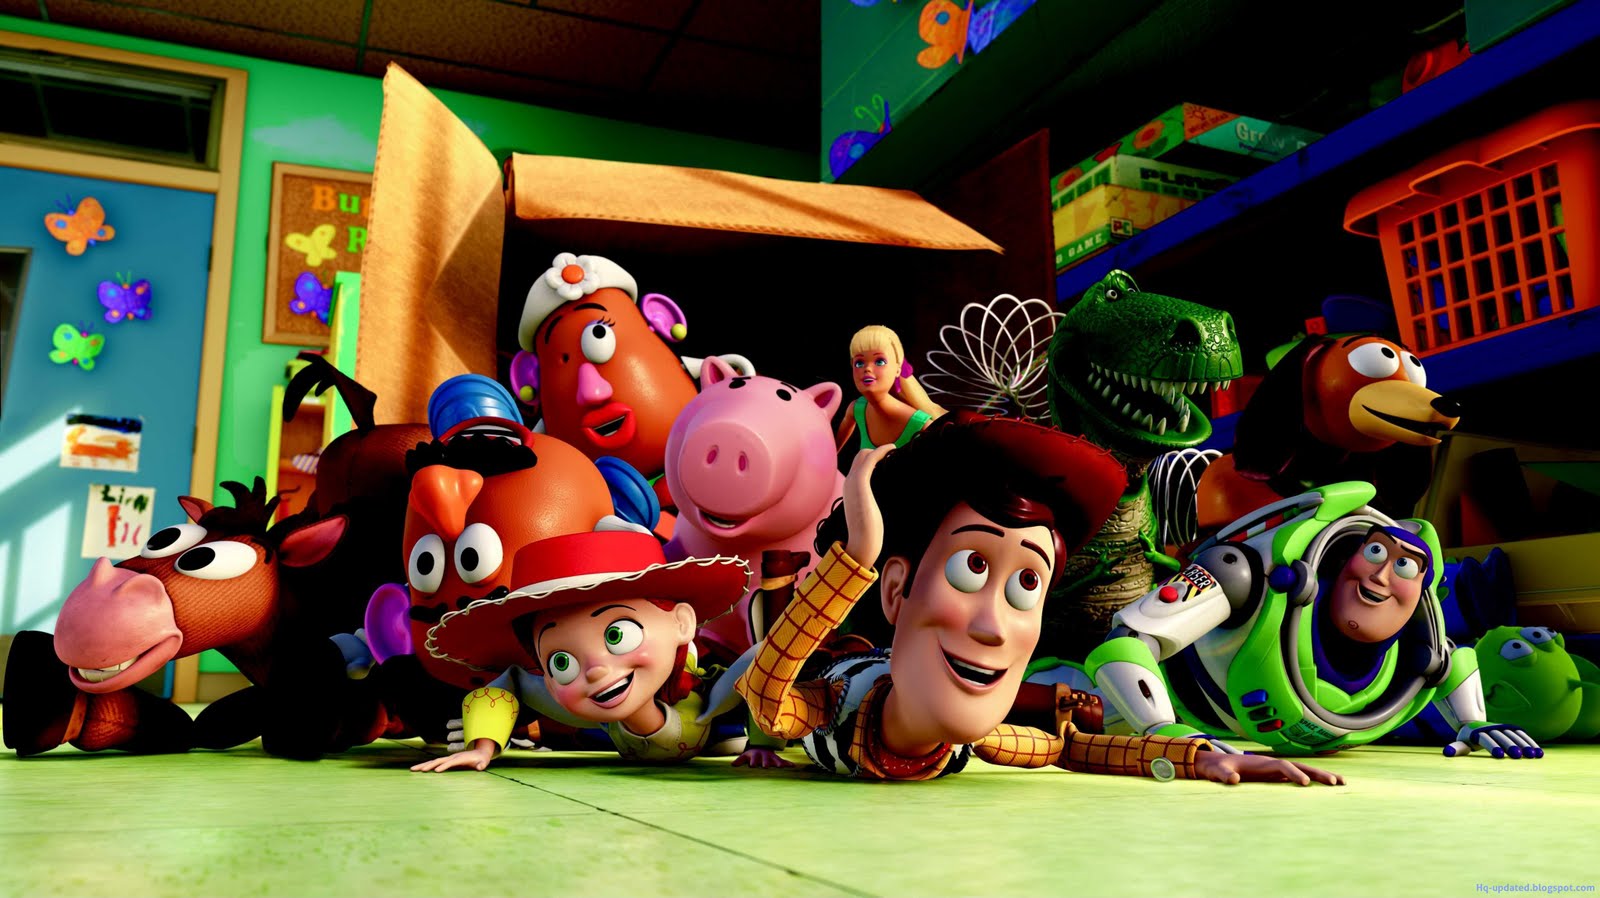 Toy Story 3 2010 Movie HQ Wallpapers Toy Story 3 is an upcoming